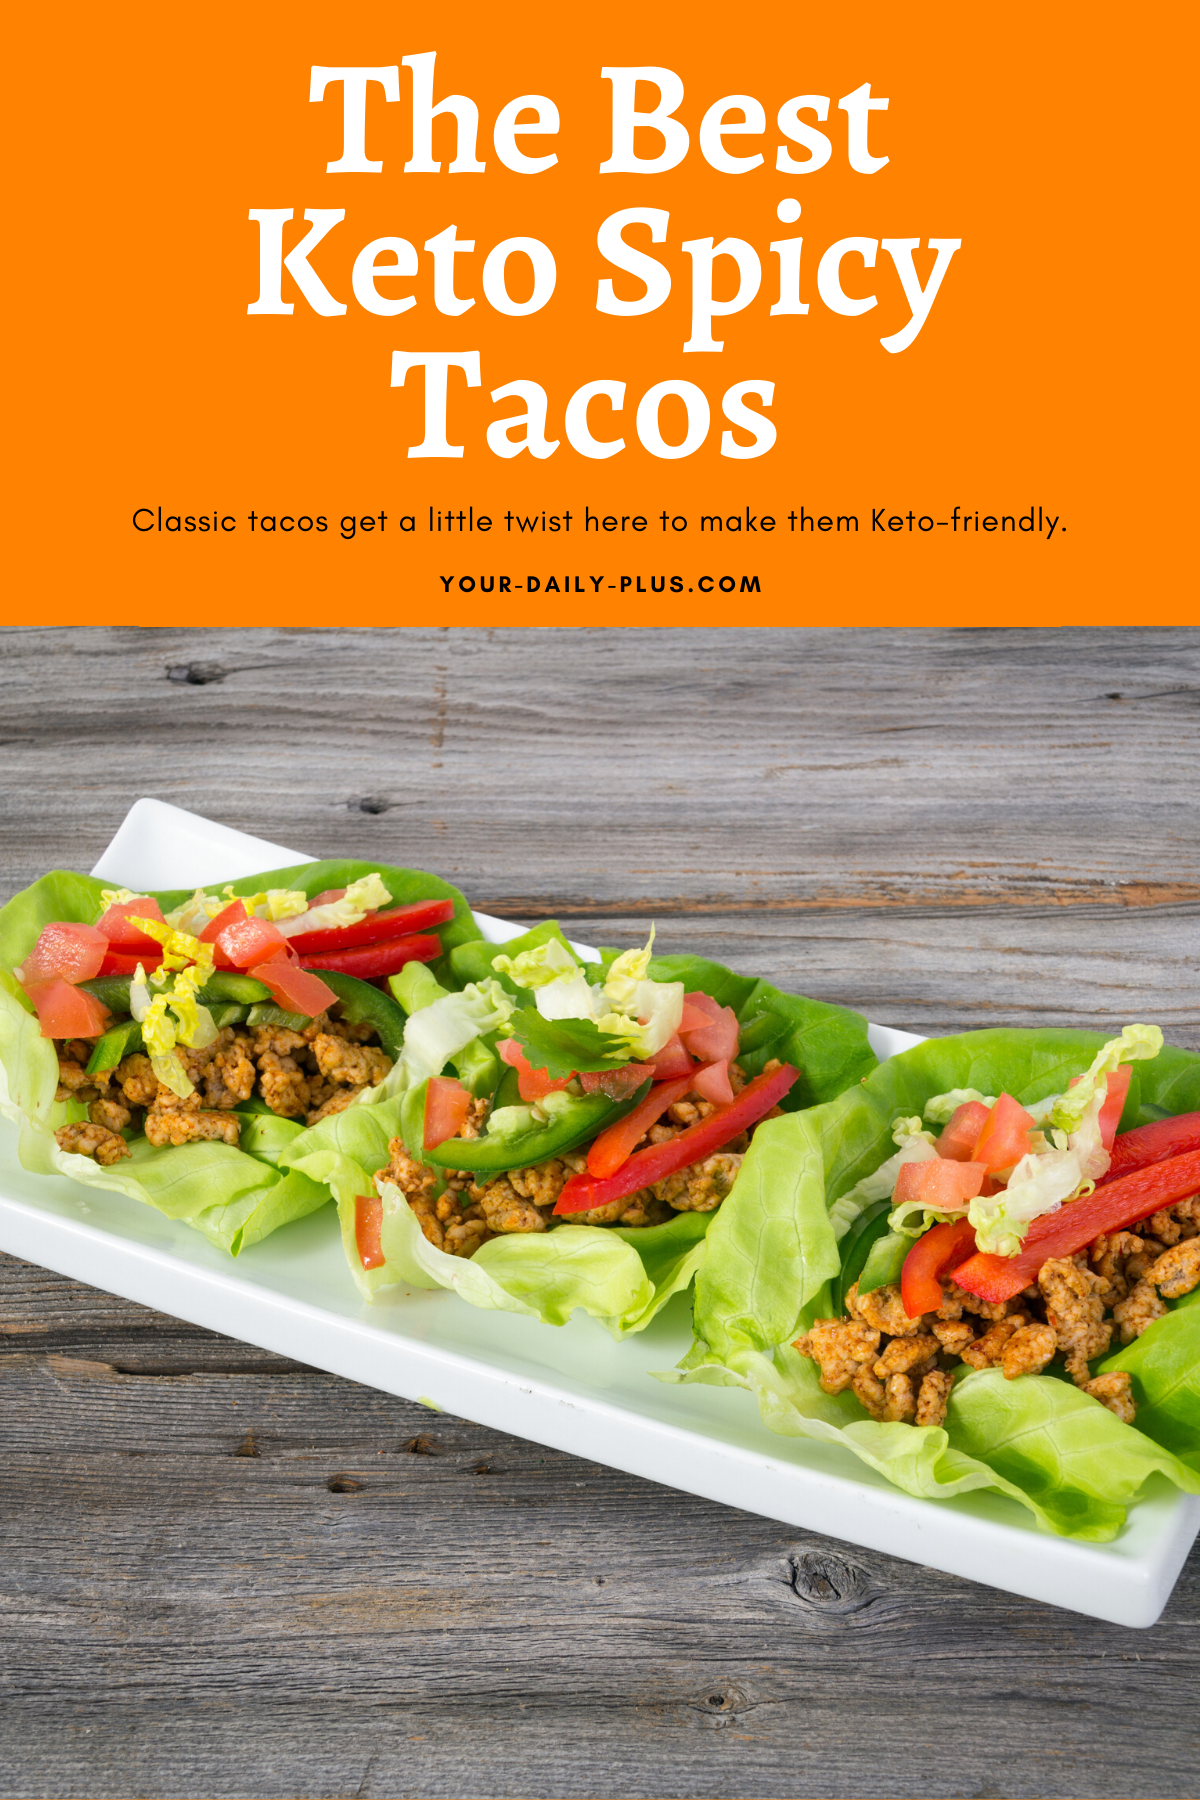 Classic tacos get a little twist here to make them Keto-friendly. We’ve tossed the carb-heavy taco shells and are using large Bib lettuce leaves instead. And really the filling is the most important part and it is super delicious. #ketodiet #ketogenic #tacos #lowcarb